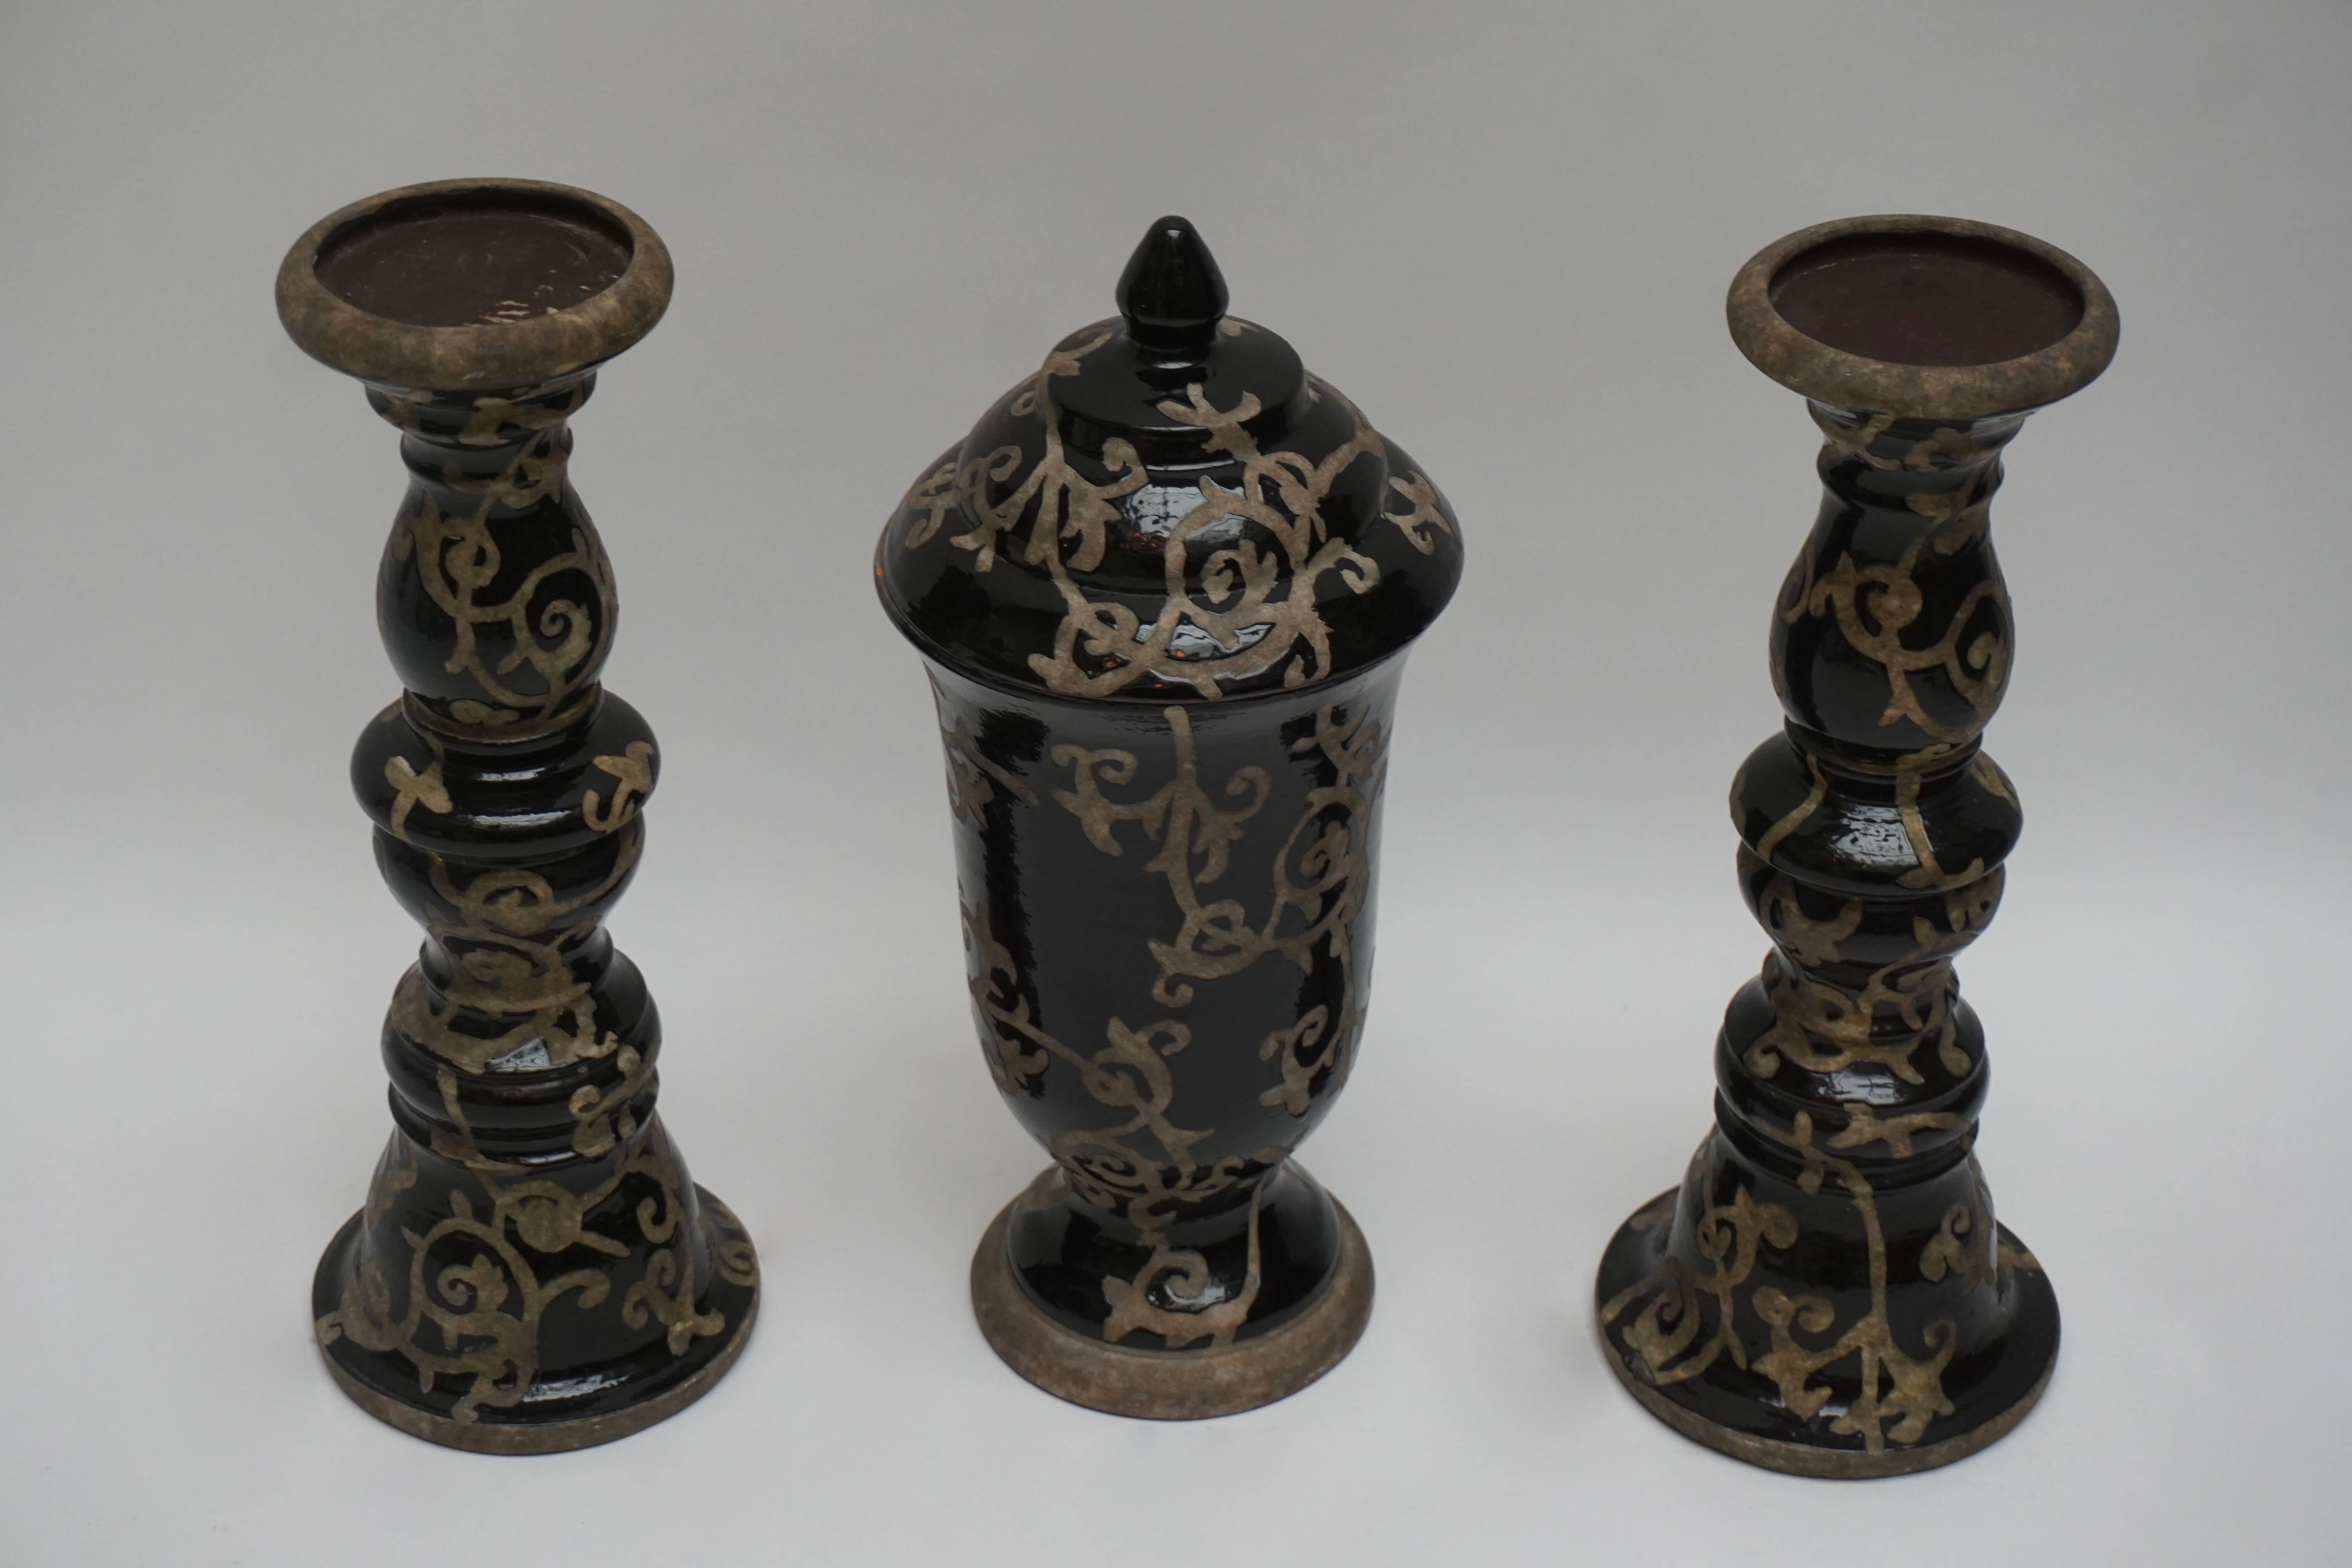 Set of two candlesticks and a vase.
The height of the vase is 42 cm. Diameter 19 cm.
The height of the candlesticks is 41 cm. Diameter 15 cm.